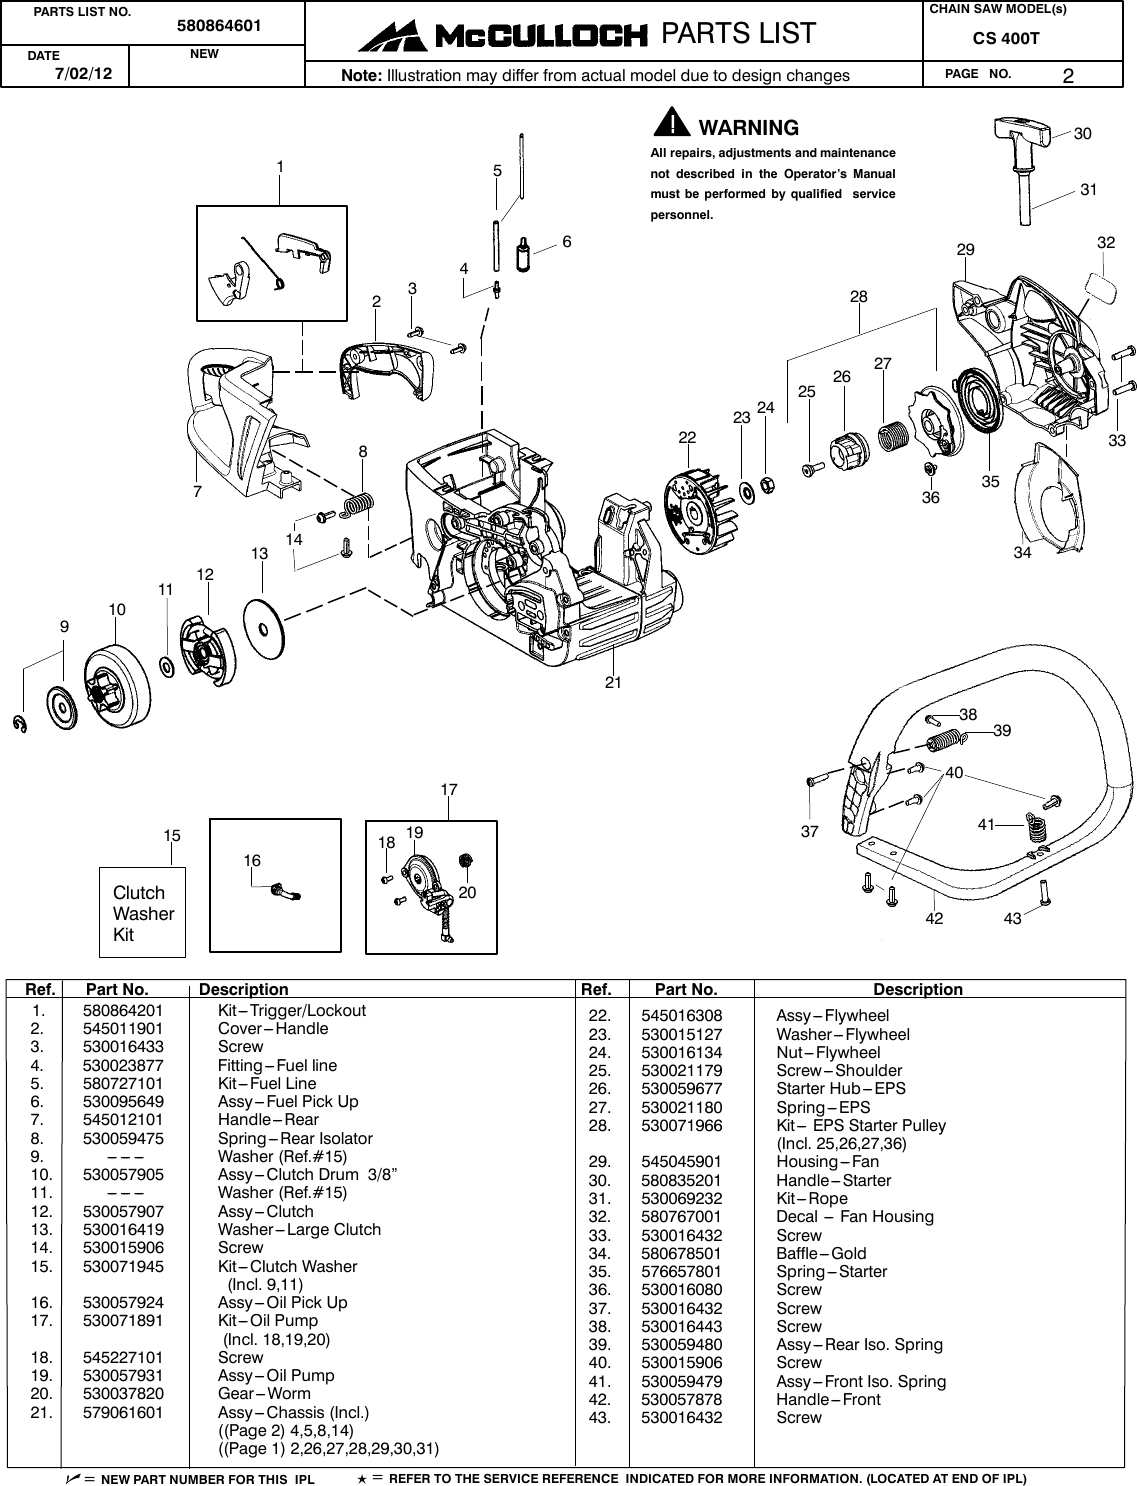 Page 2 of 3 - McCulloch 580864601 IPL, McCulloch, CS 400T, 967156318, 2012-08, Chain Saw User Manual  To The Bb5133b3-e36e-45ab-986c-f56c54bc8378